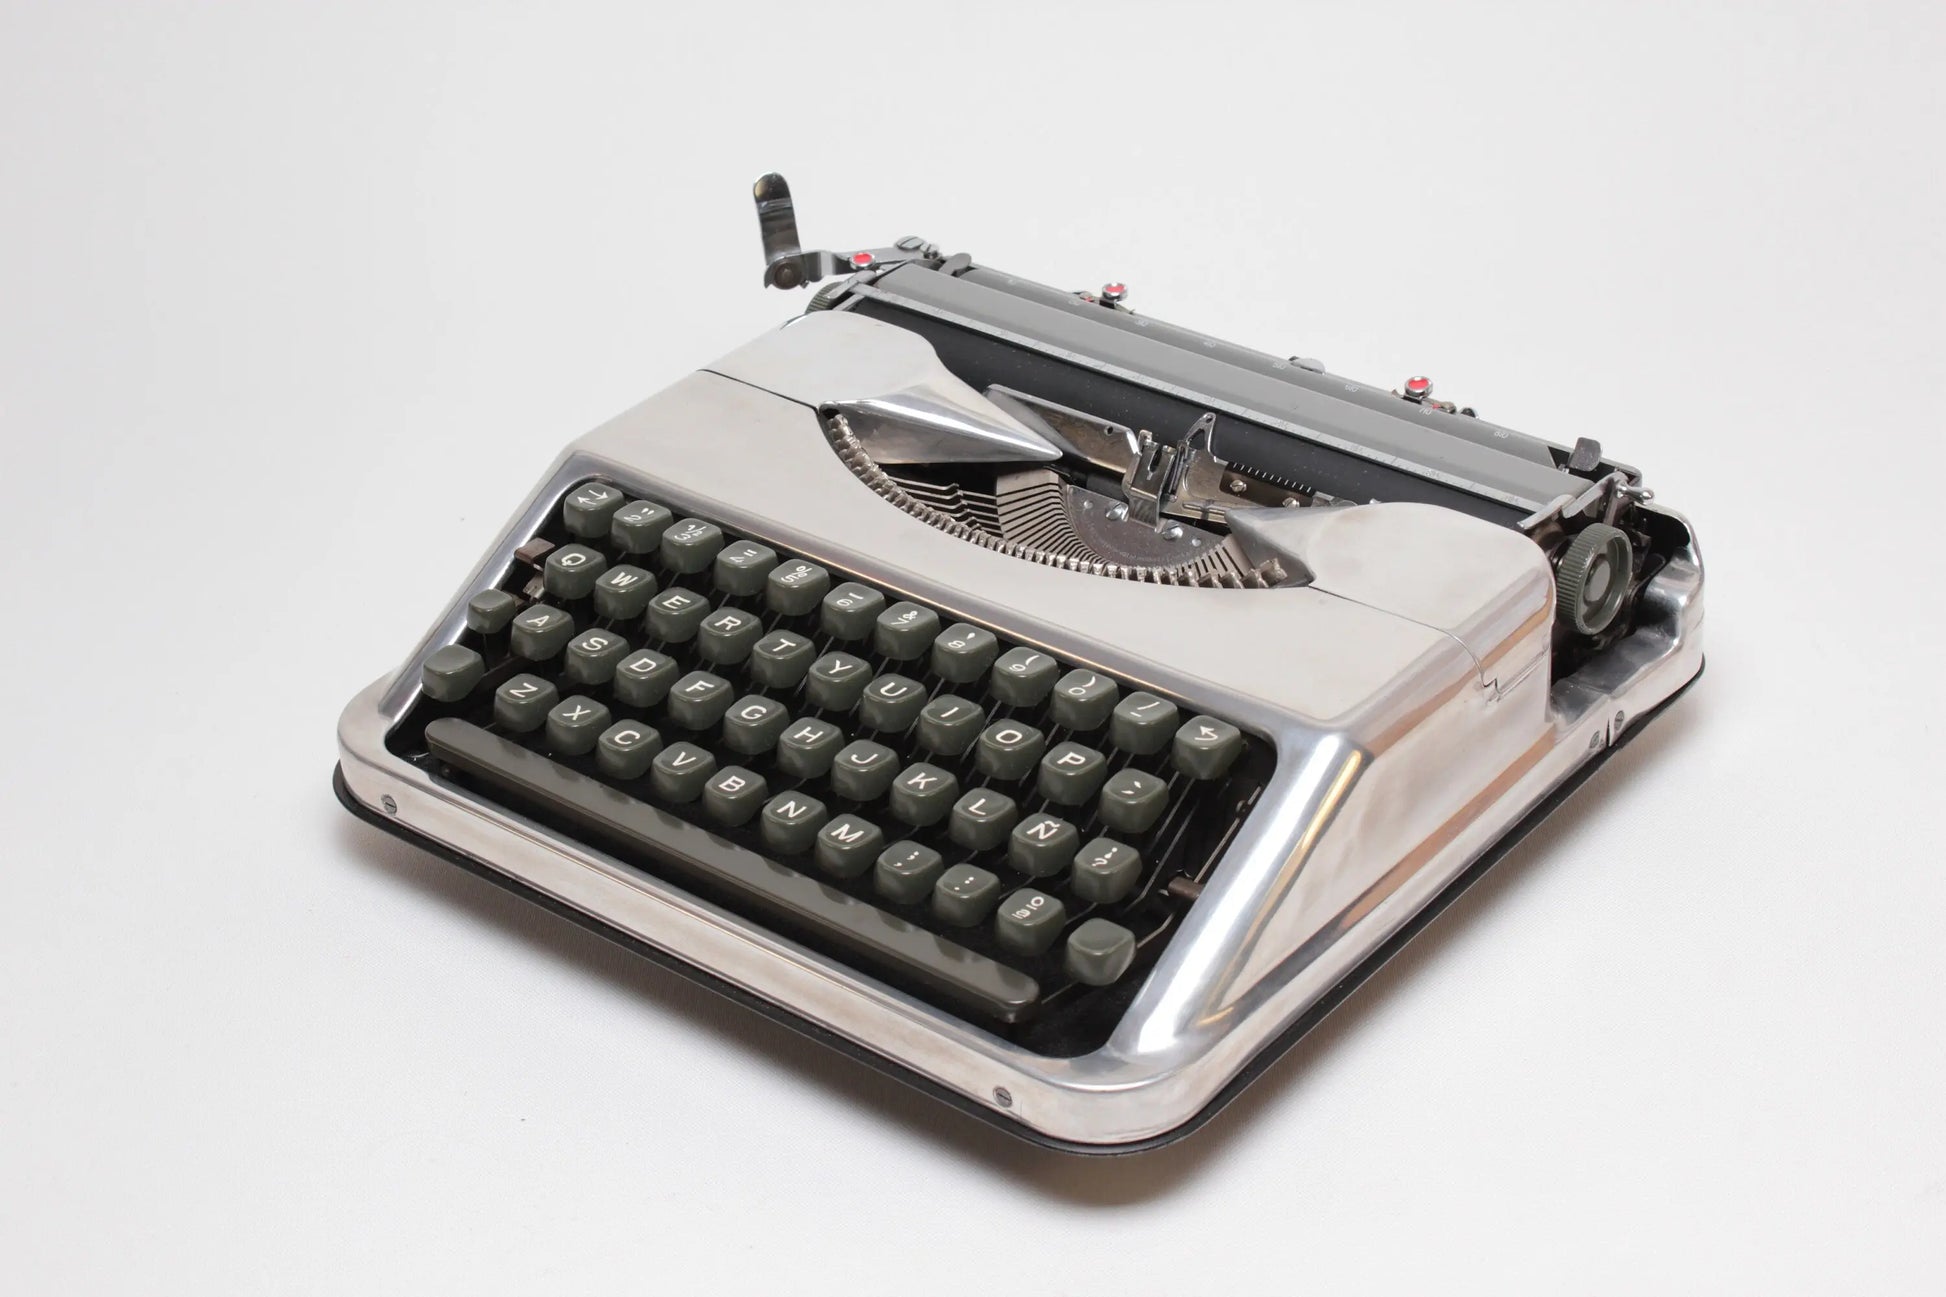 SALE! - Limited Edition Hermes Baby Polished Silver Typewriter, Vintage, Professionally Serviced - ElGranero Typewriter.Company